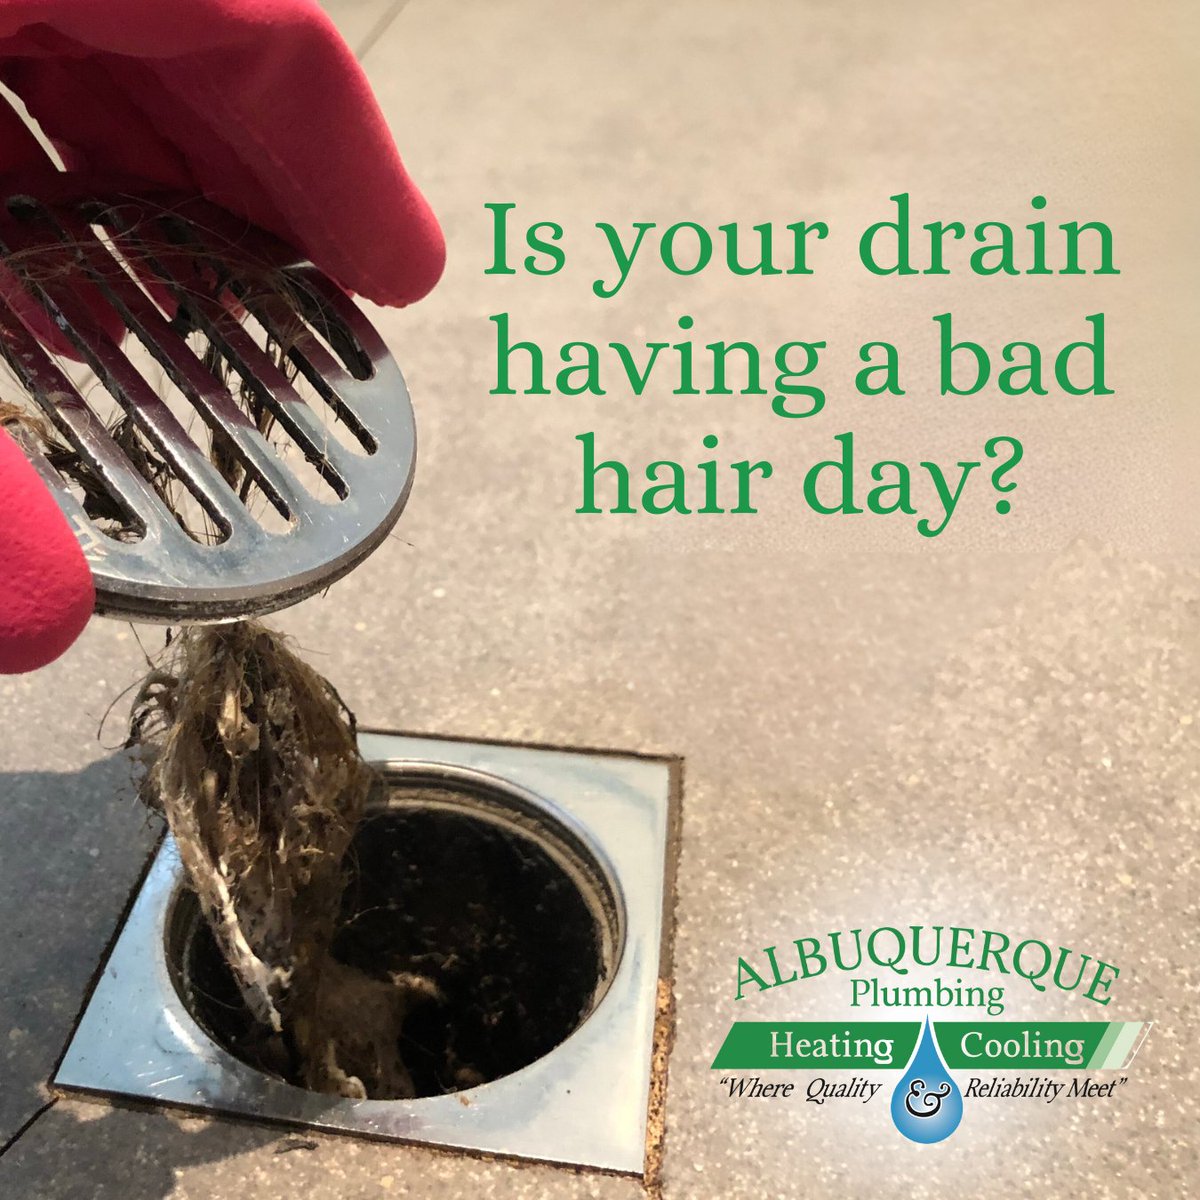 If your drains are grossing you out, give us a call. We have seen it all!!! #abqplumbers #smellydrains #weareheretohelp #albuquerquedrains